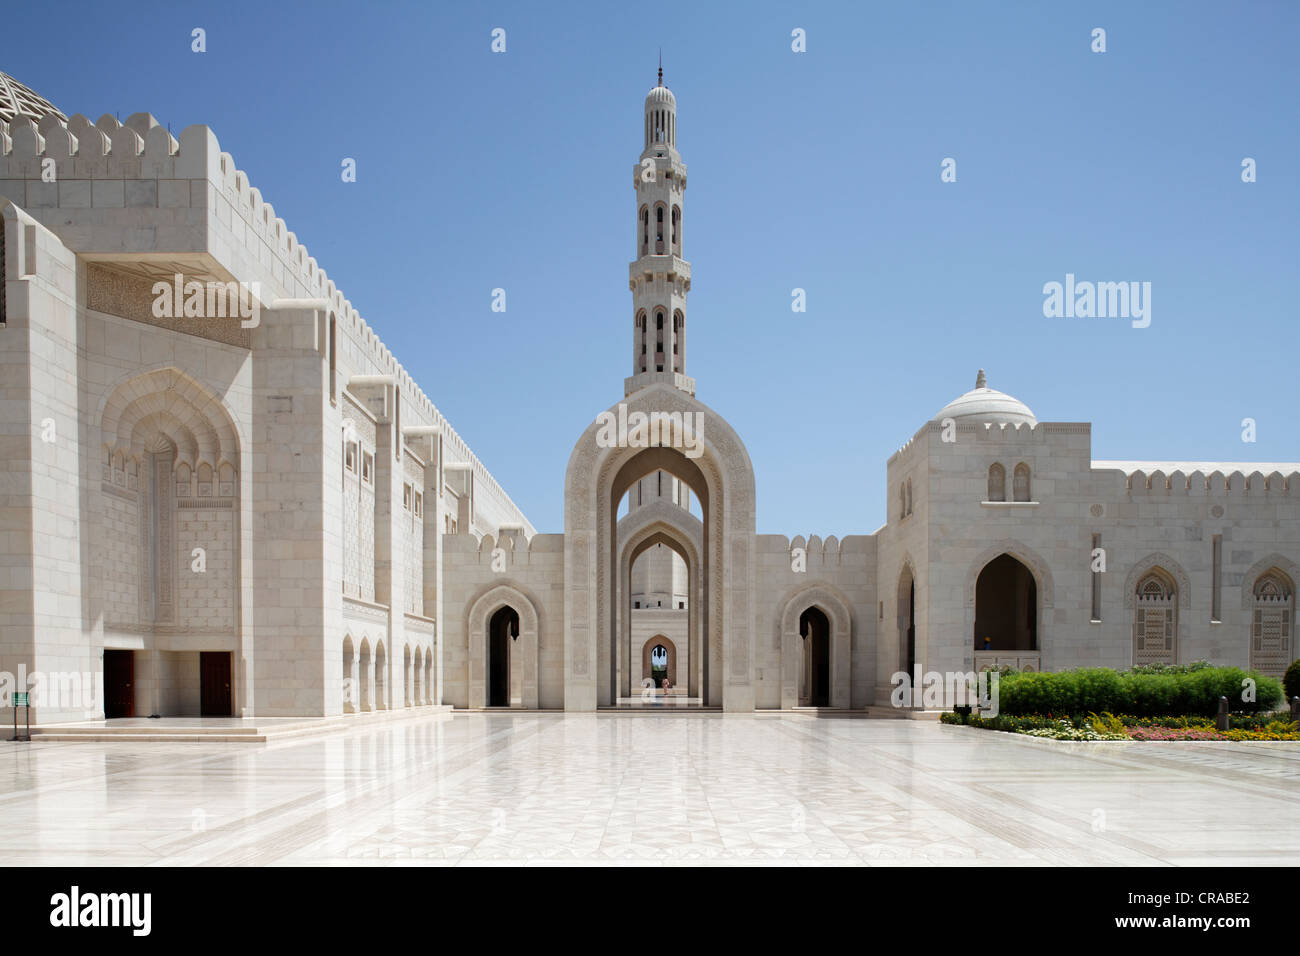 Square with pointed arch, gate, minaret, Sultan Qaboos Grand Mosque, Muscat capital, Sultanate of Oman, gulf states Stock Photo